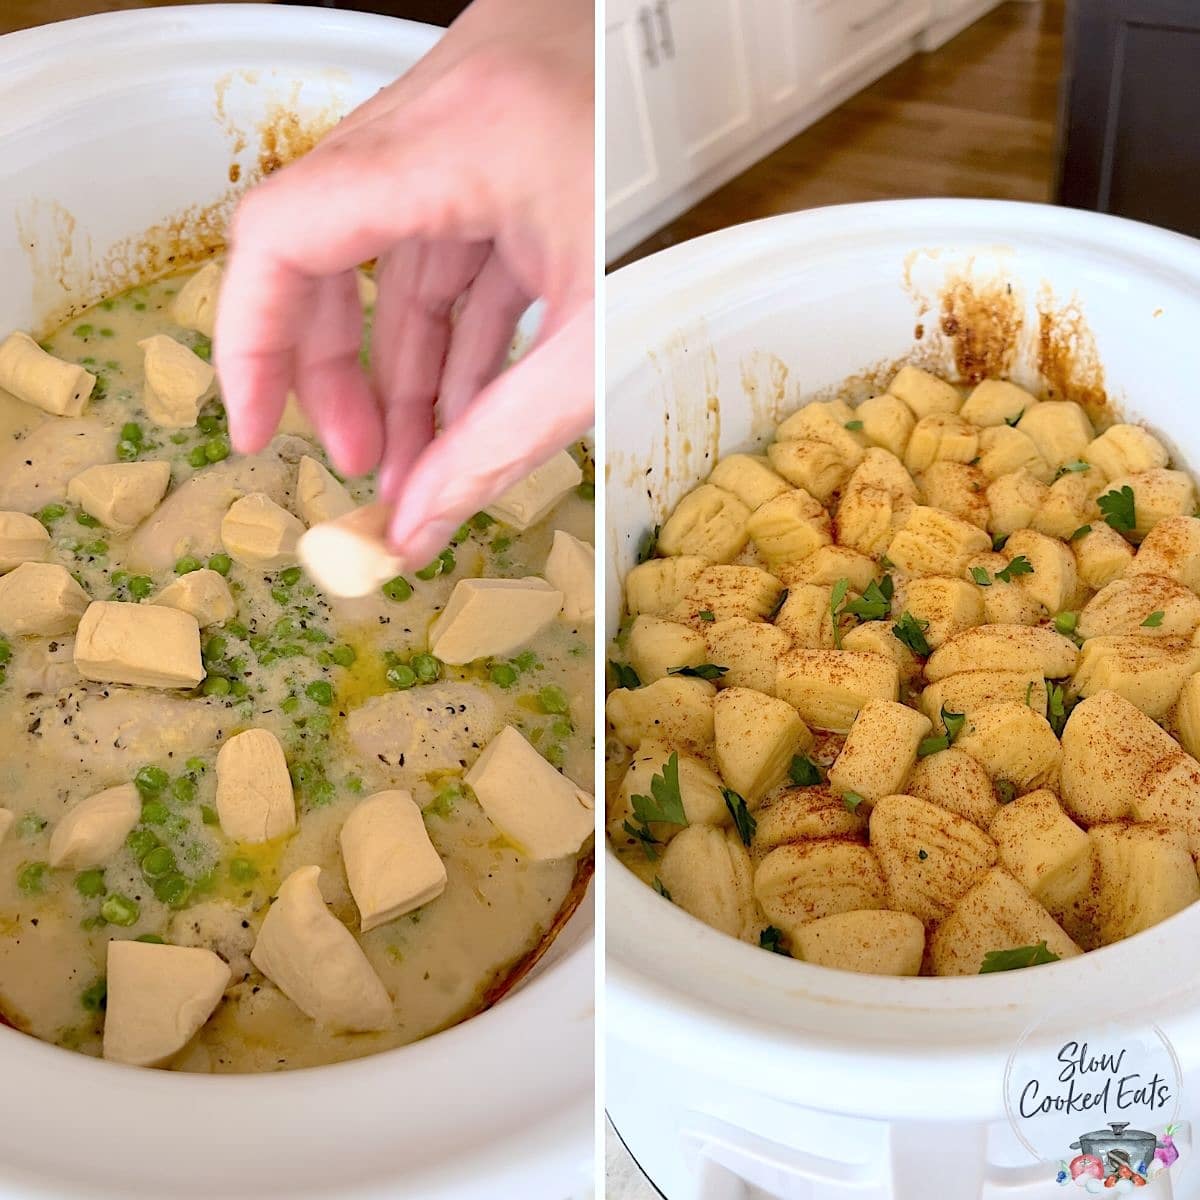 Placing the cut up refrigerator biscuit dumplings over the top of the crockpot chicken and dumplings.